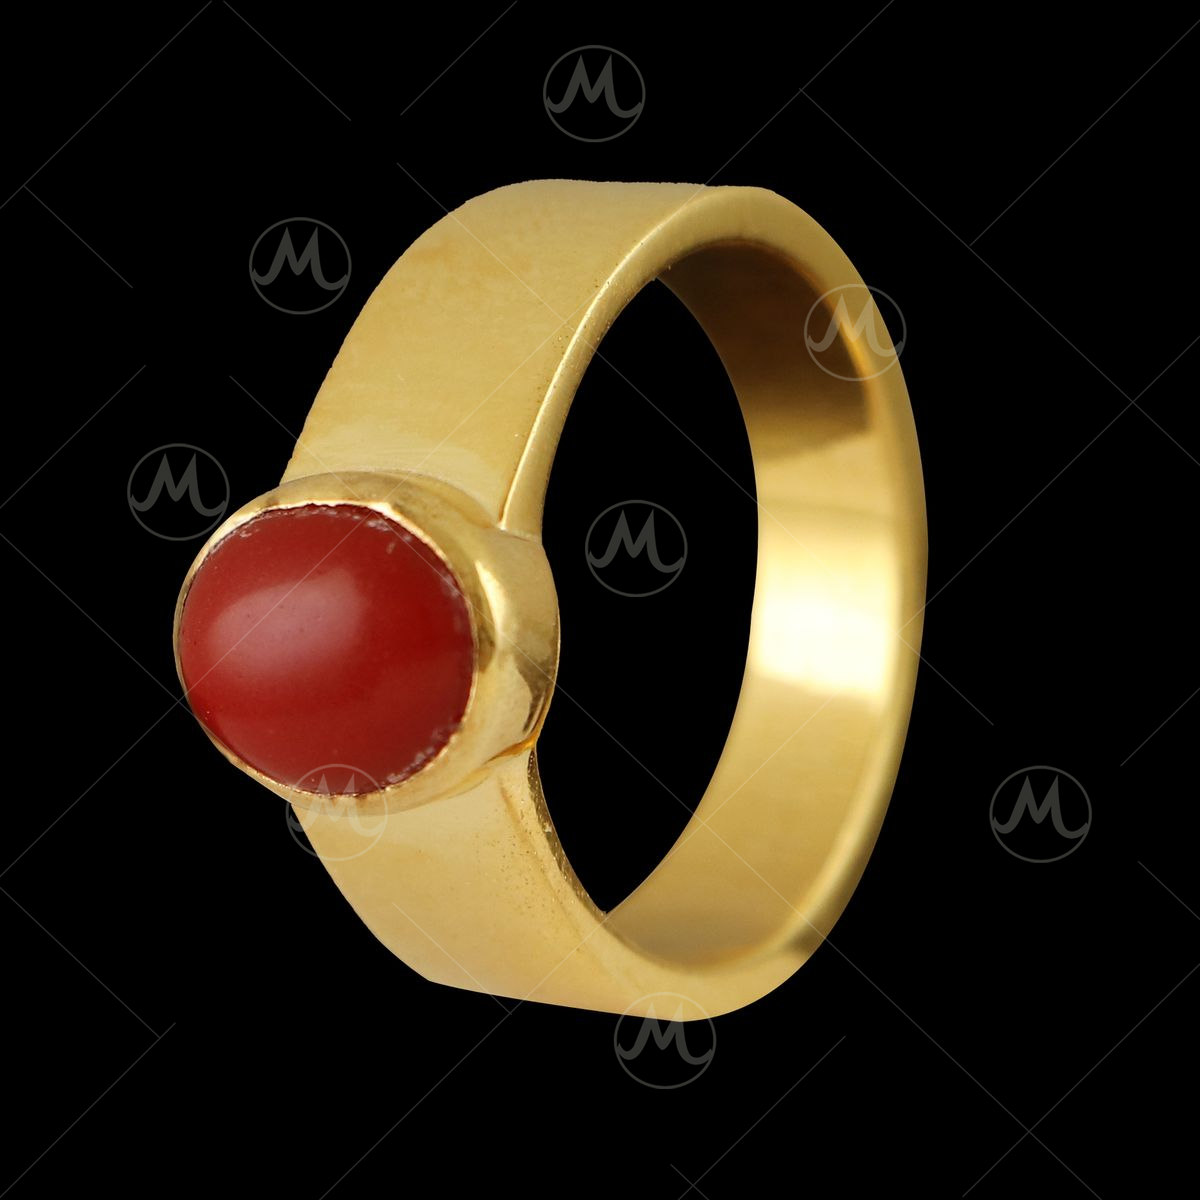 CORAL RING - Silver Plated with Coral Stone